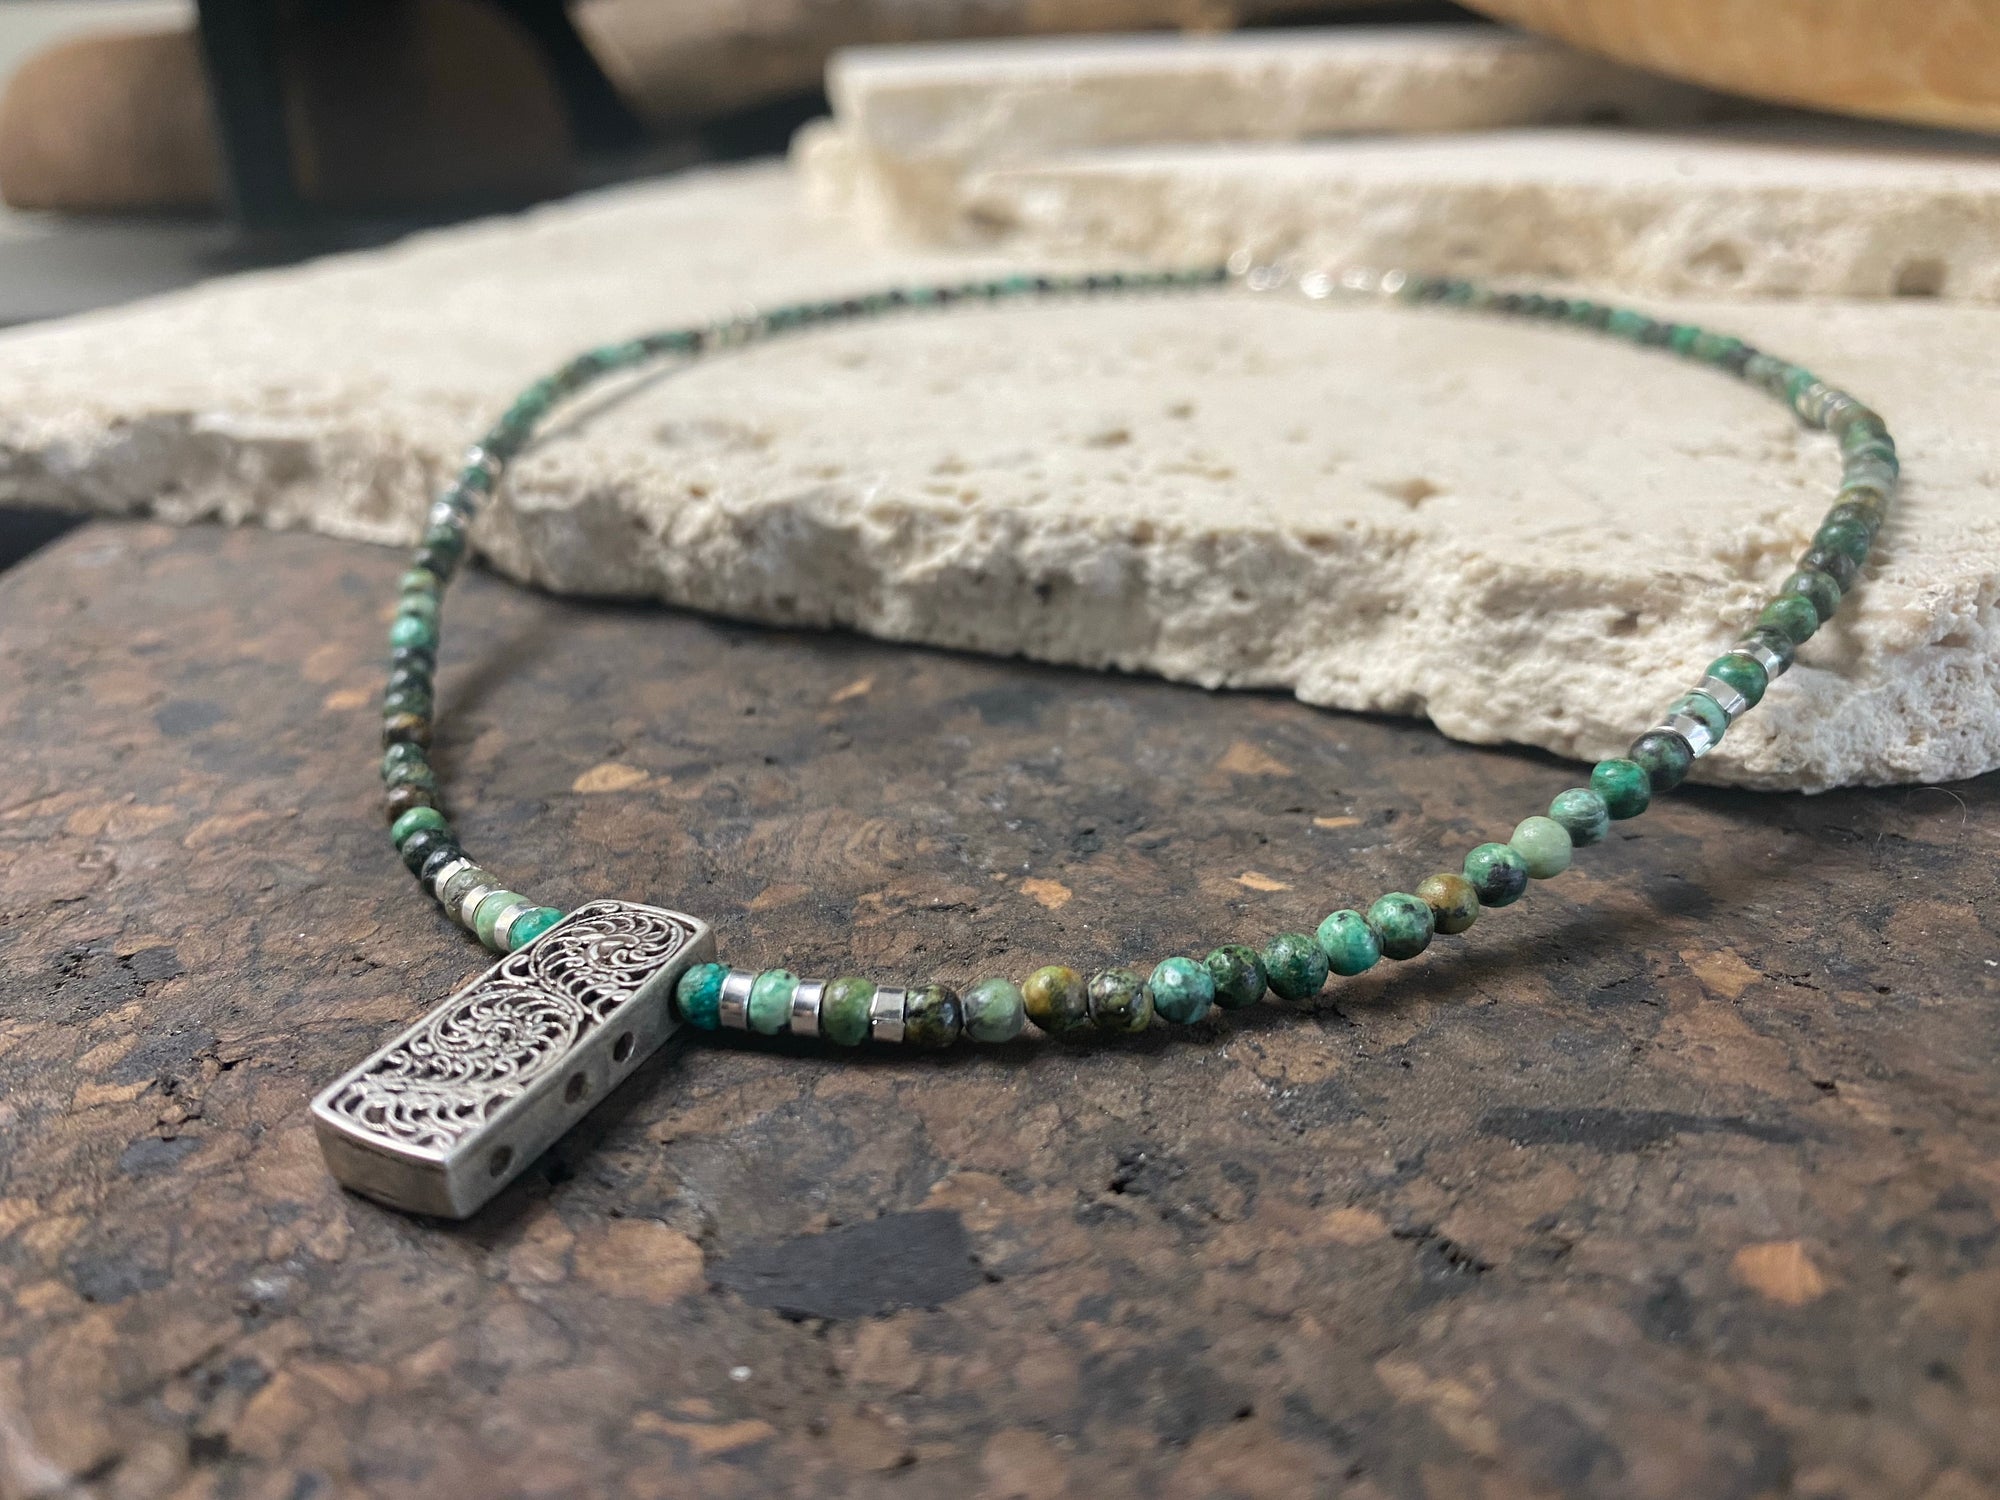 Contemporary necklace of round natural African turquoise, highlighted with sterling silver beads, a vintage Indian filigree silver pendant and sterling silver findings and clasp. Length 43.5 cm (17.25”), pendant 2.2 cm (1")